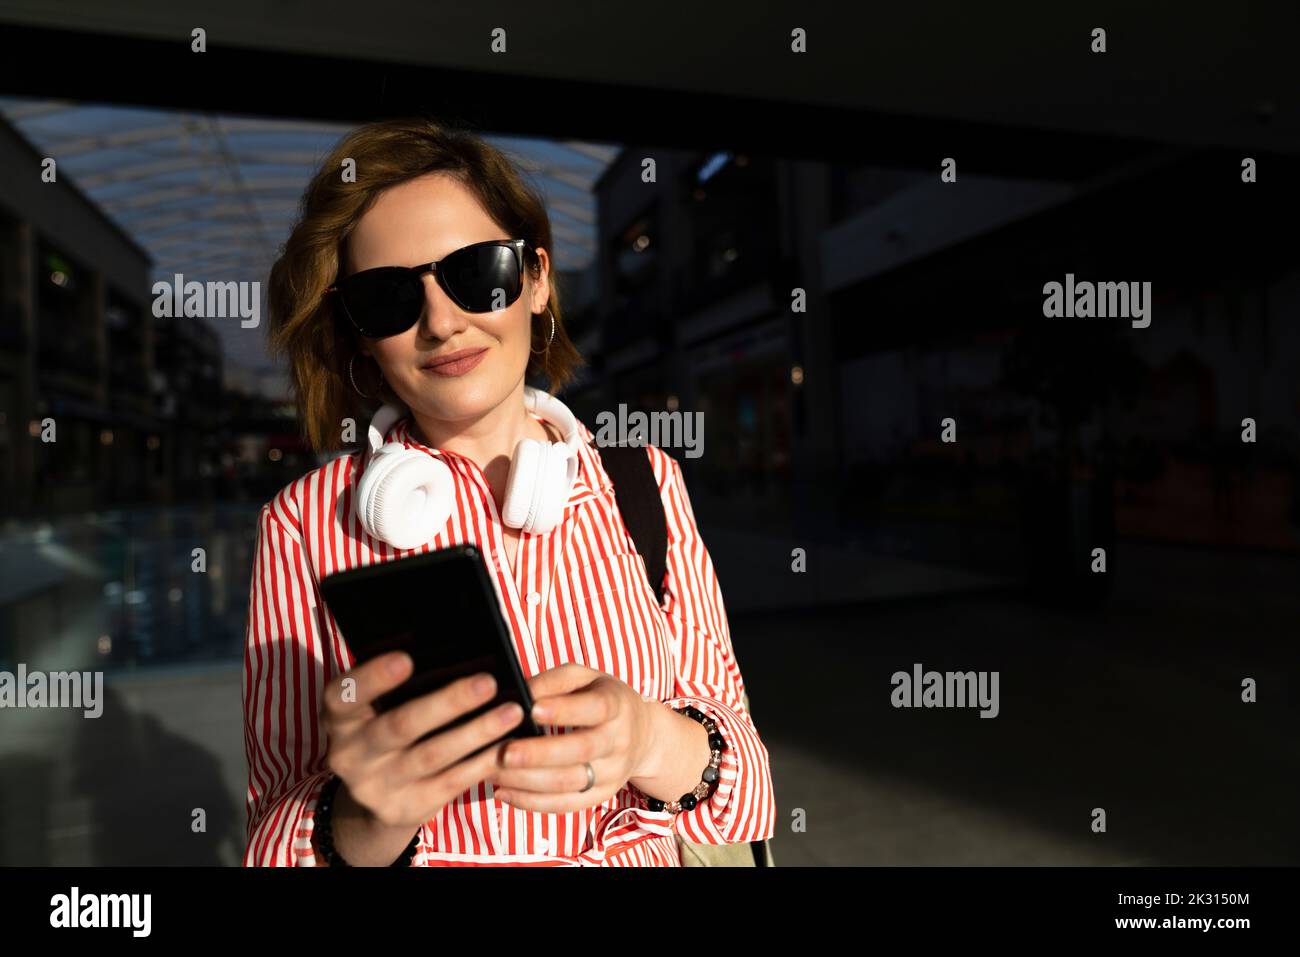 Smiling woman wearing sunglasses using smart phone in shopping mall Stock Photo